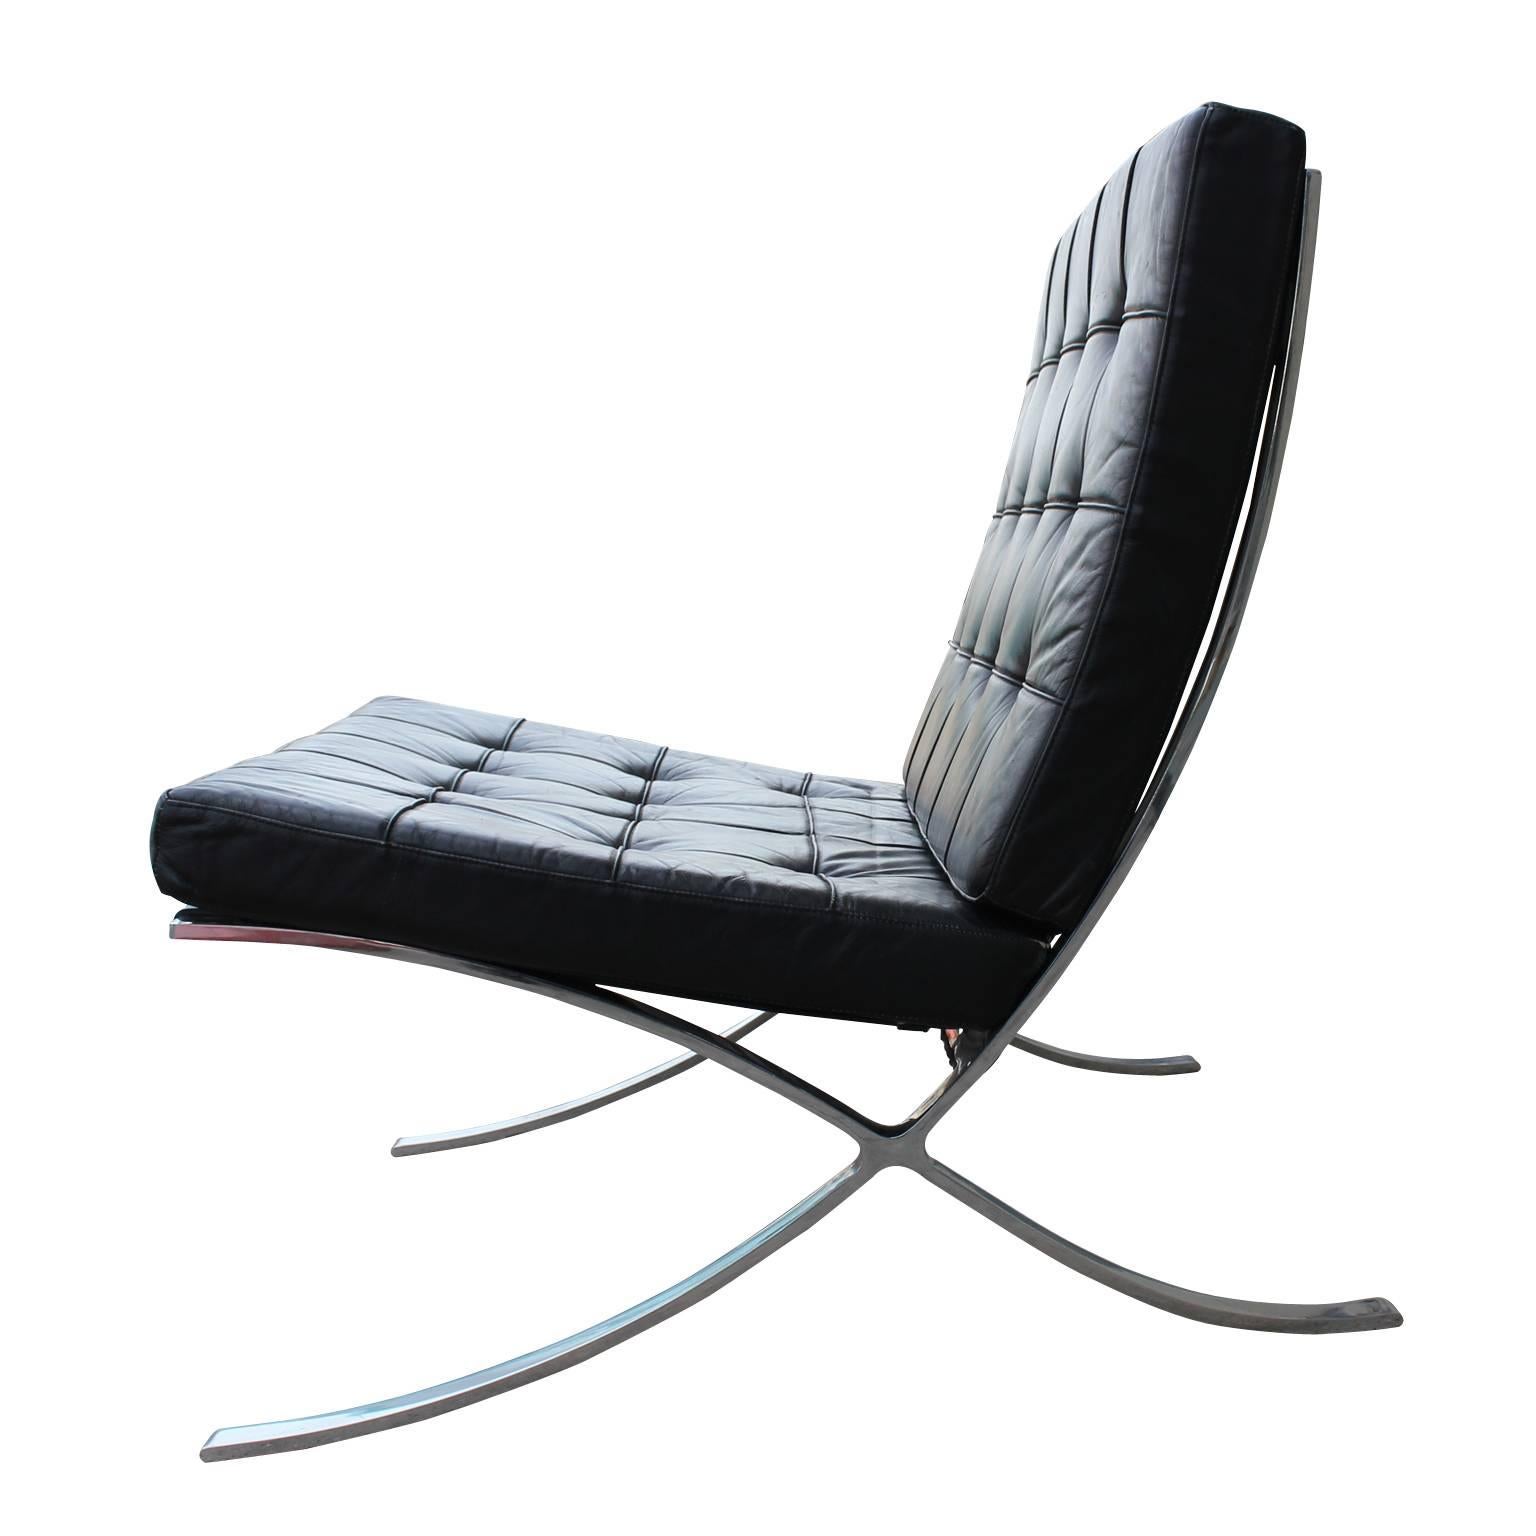 Modern Knoll-Inspired Barcelona chair in black leather and with a chrome frame. Has four buttons missing on the seat, but in otherwise great condition and a great addition to your living room or office, circa 1970s.